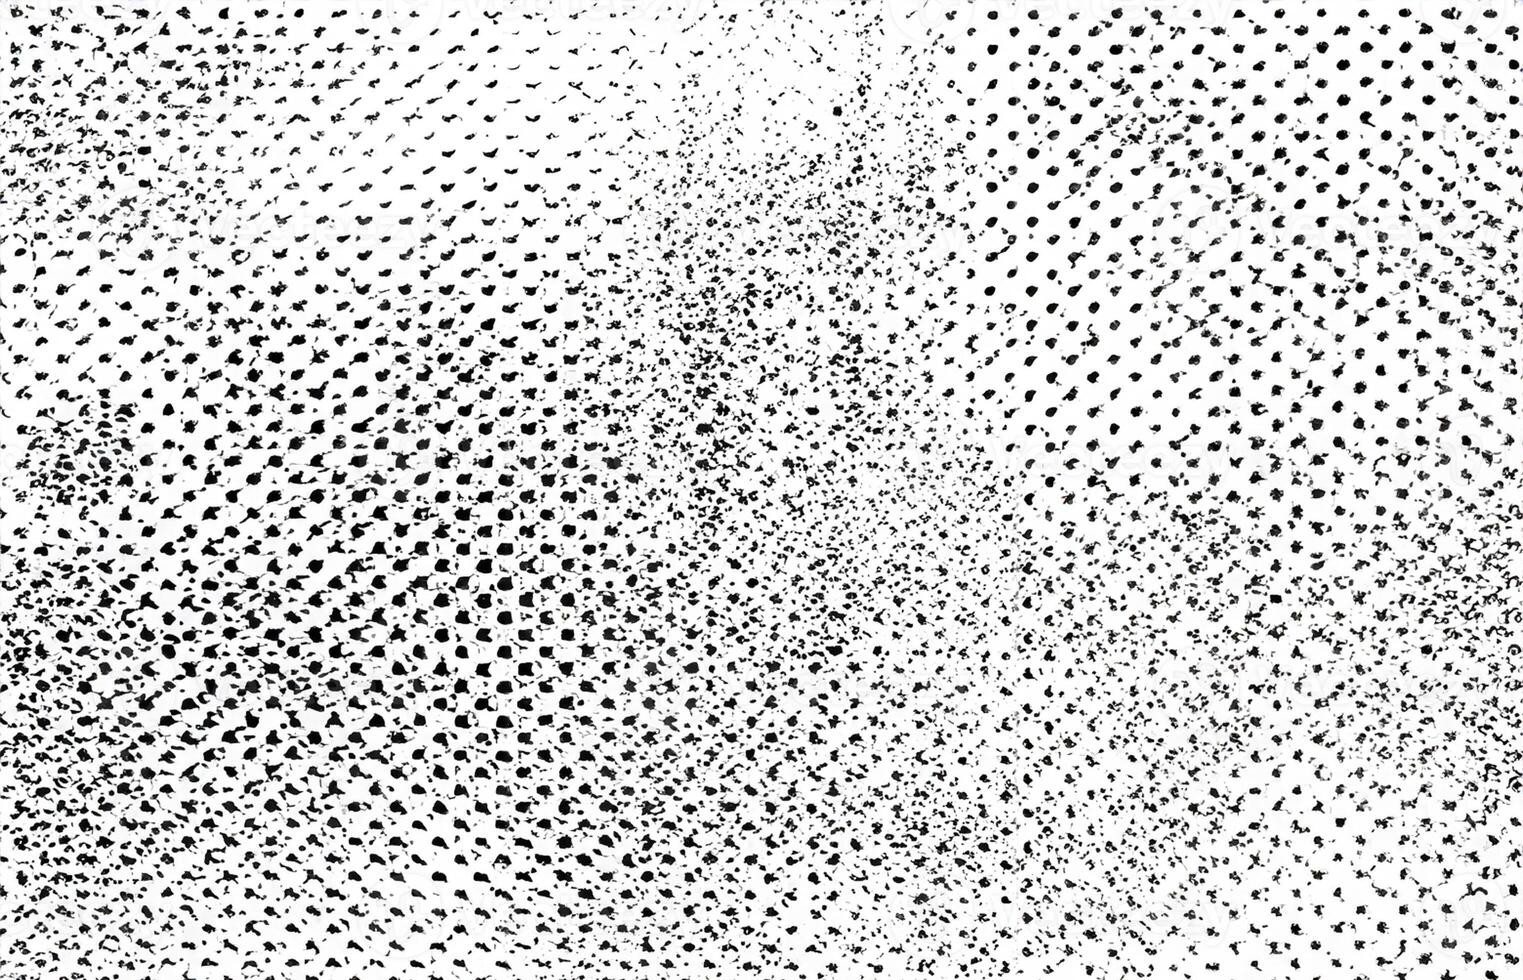 Abstract Grunge Texture Overlay, Unfinished Black and White Vector Design on White Background. photo